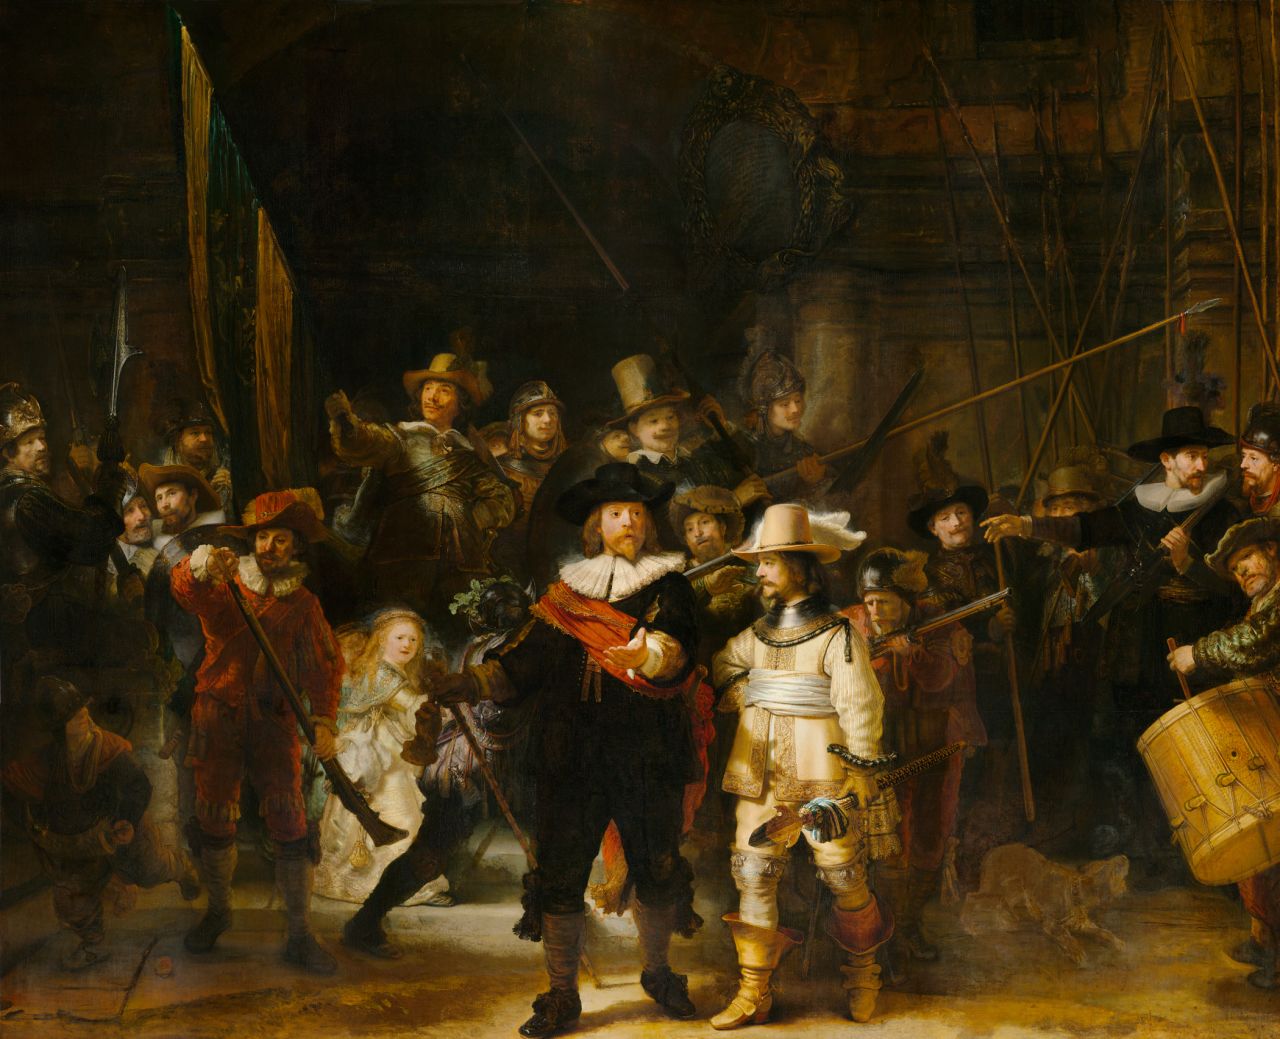 At the heart of the gallery is its most-prized possession, "The Night Watch," by Rembrandt van Rijn (1642). The museum was designed around the painting, and it is the only artwork to be returned to its original place.